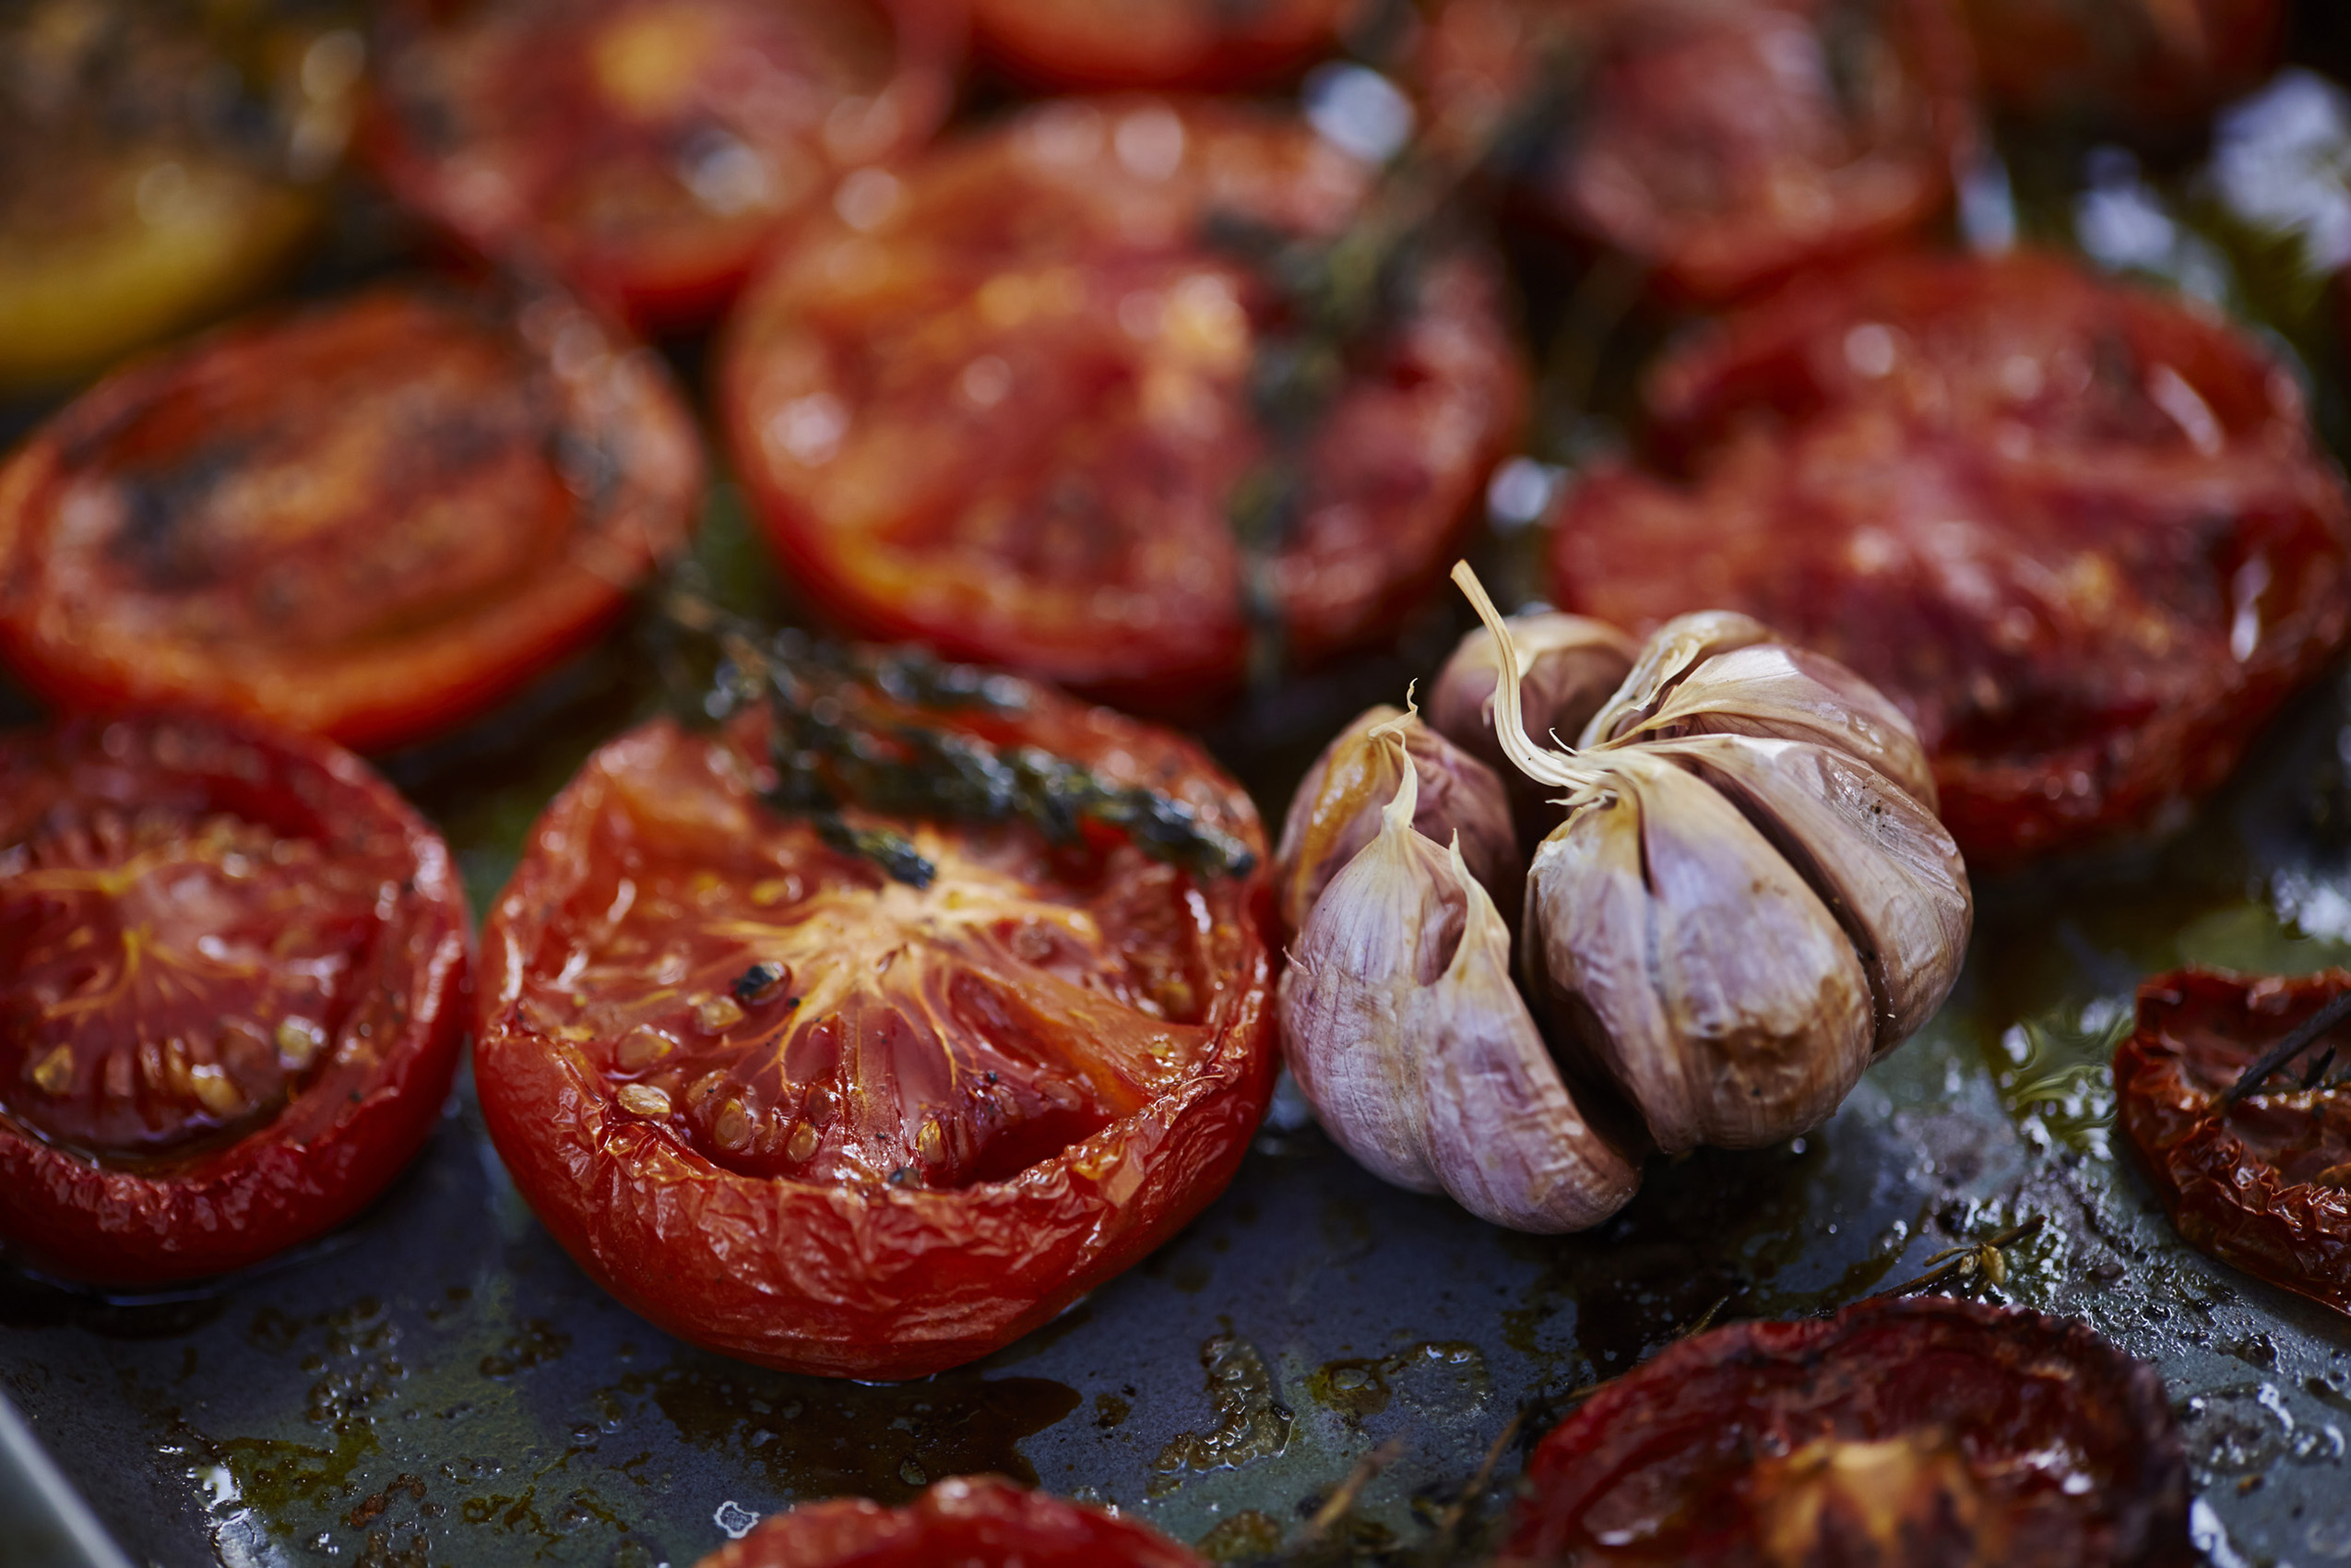 SteveRyan_Photographer_Ingredients_Produce_Vegetables__Tomato_Grilled_22